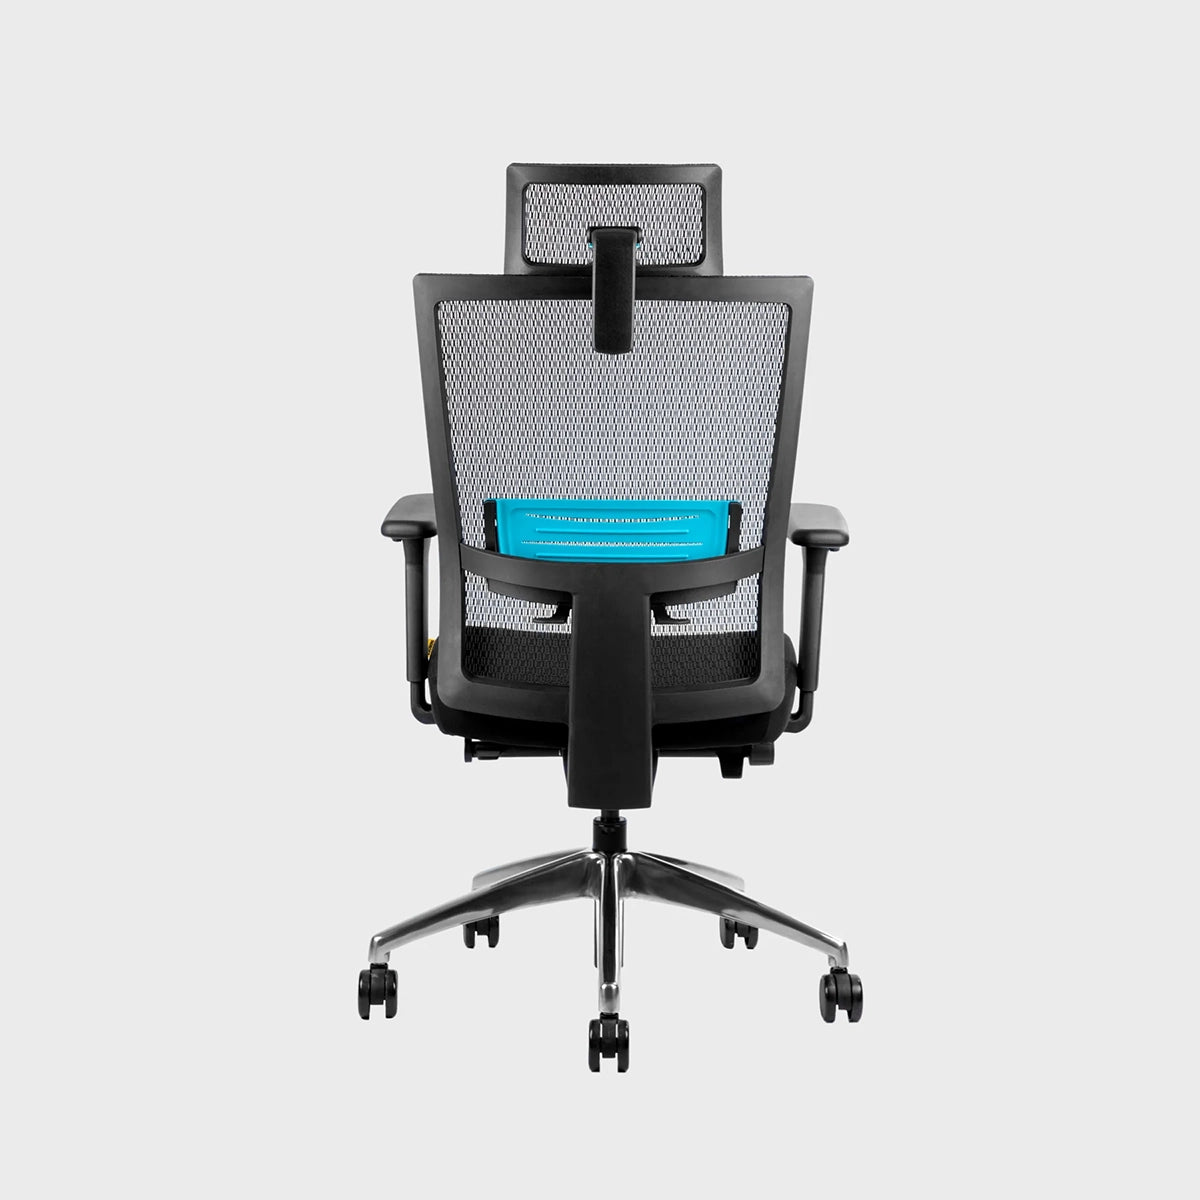 Hog - Office chair by Zoowork